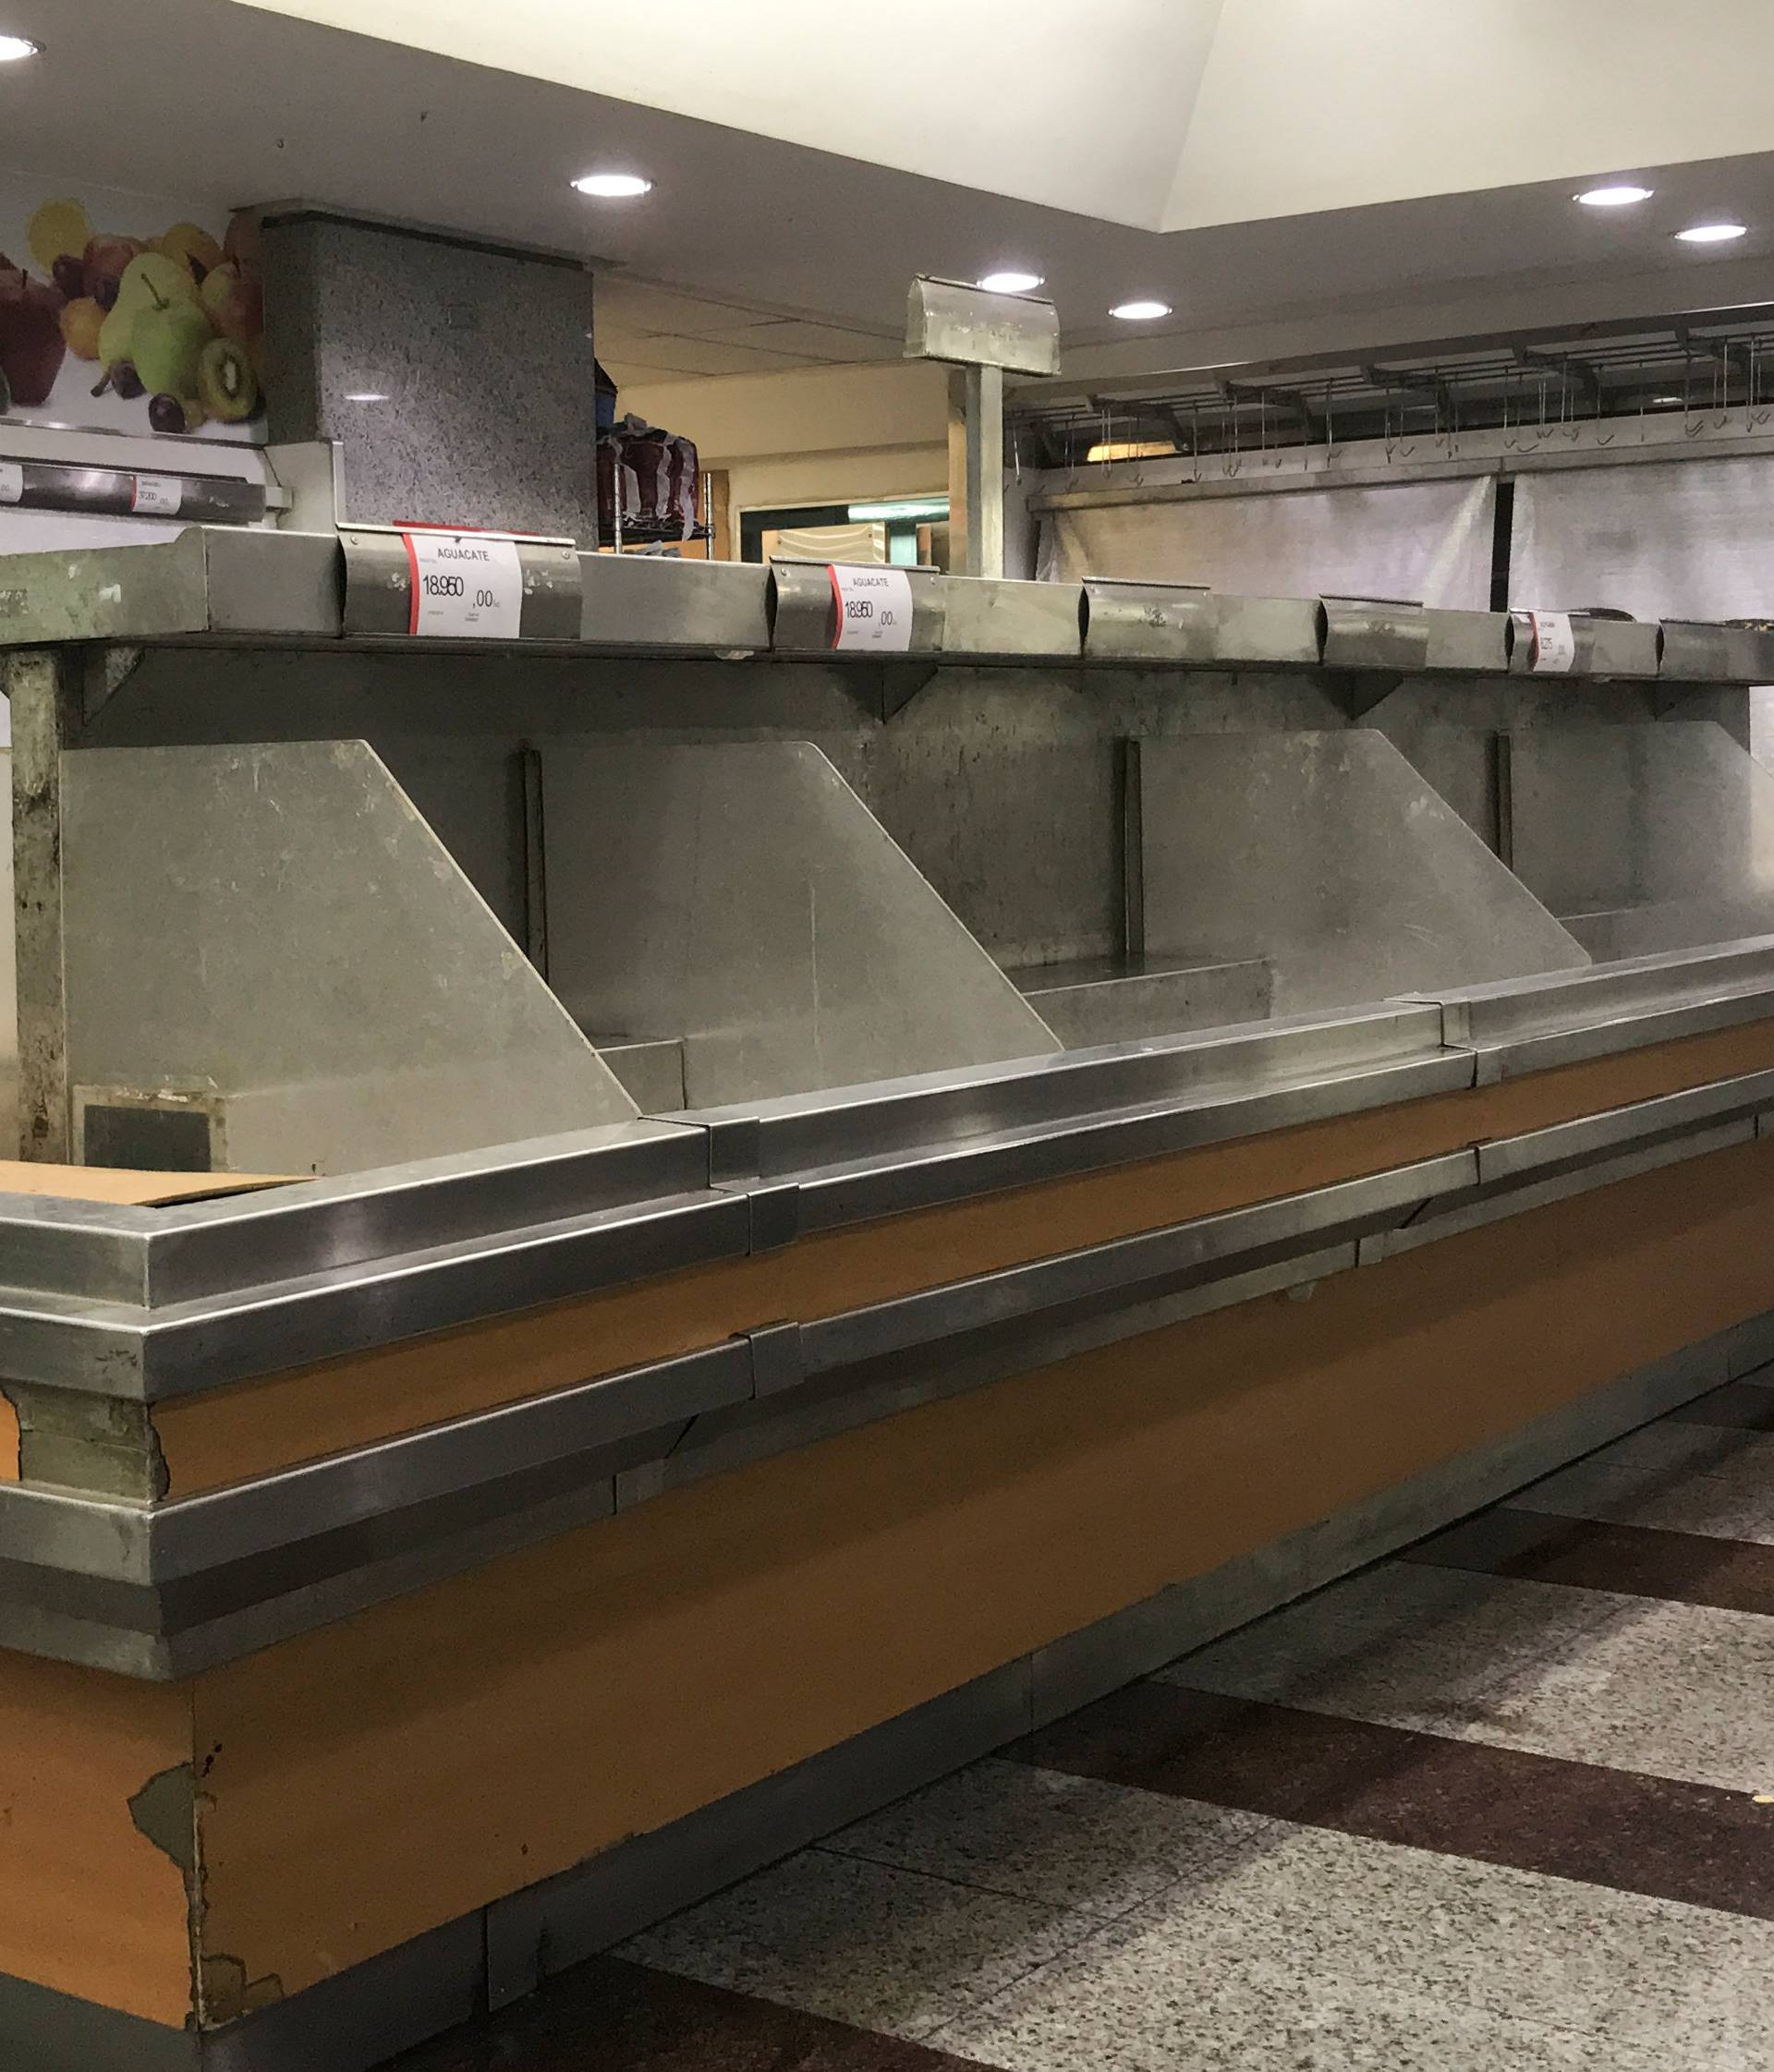 A woman walks past empty shelves at the fruits and vegetables area in a supermarket in Caracas